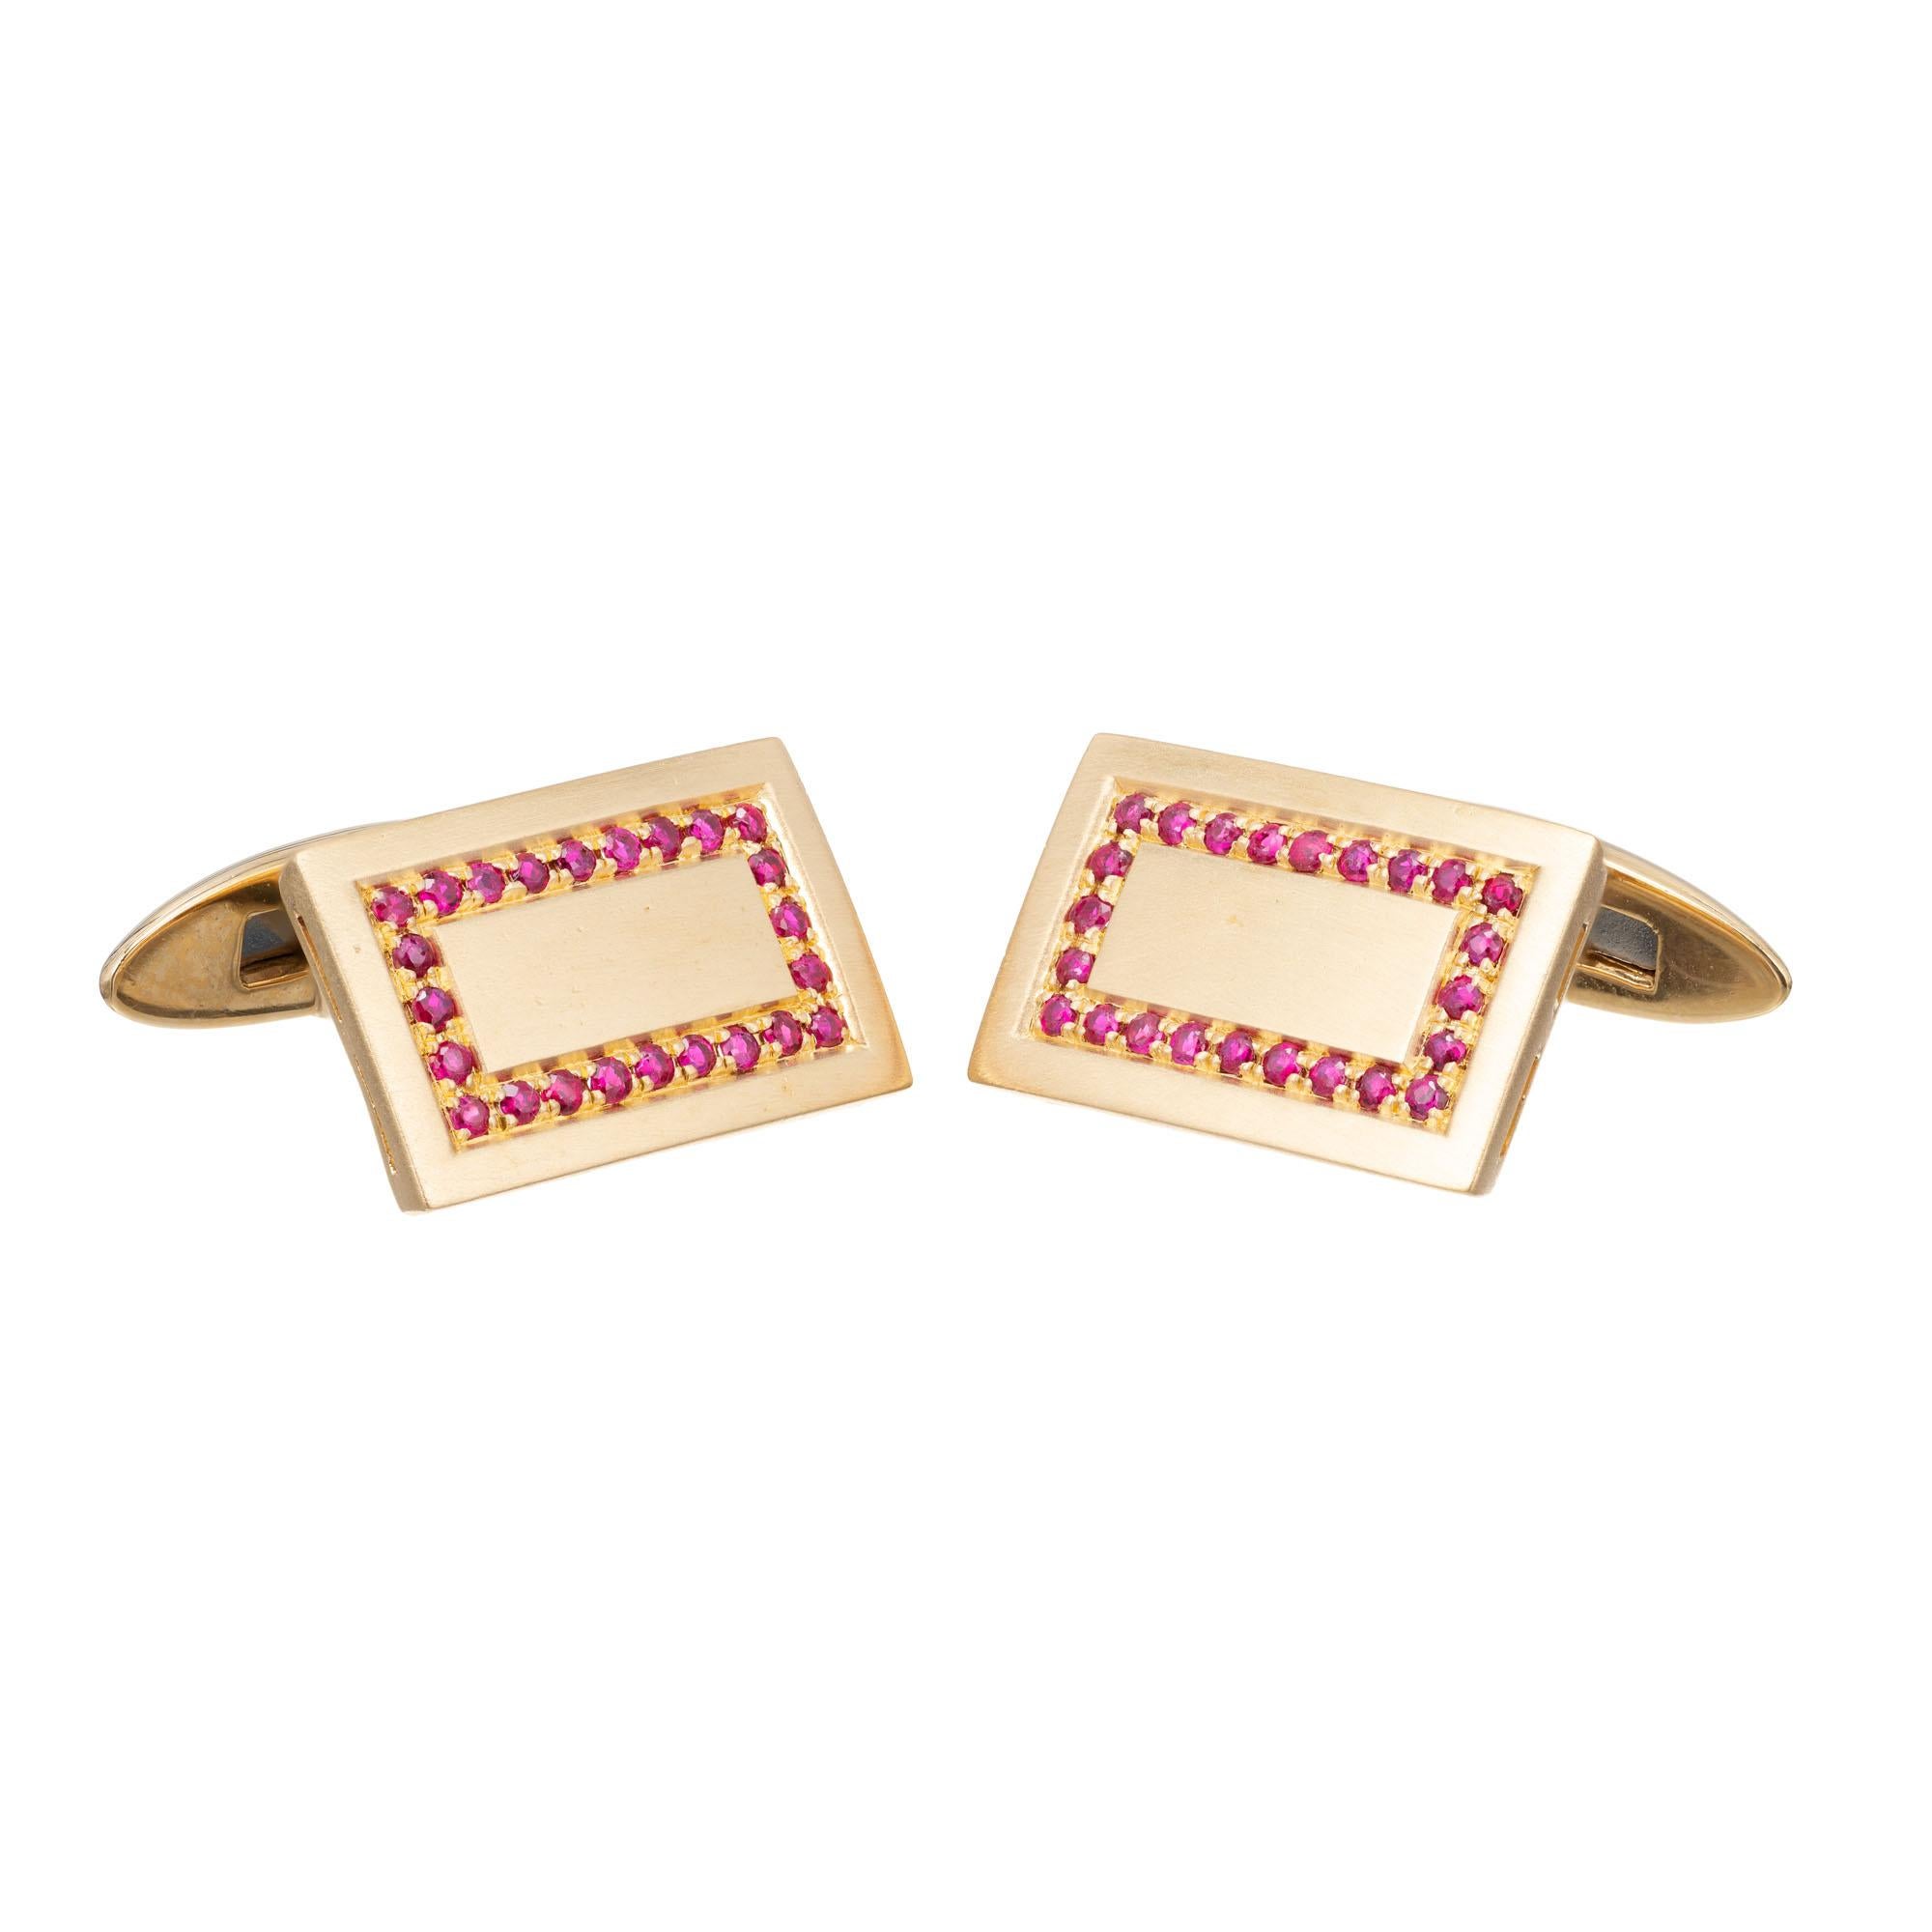 Brushed 18k yellow gold cufflinks with a halo of red rubies on each cufflink.

48 round red rubies, approx. .50cts
18k yellow gold
Stamped: 750
15.6 grams
Top to bottom: 19.54mm or ¾ Inch
Width: 12.82mm or ½ Inch
Depth or thickness: 2.9mm




